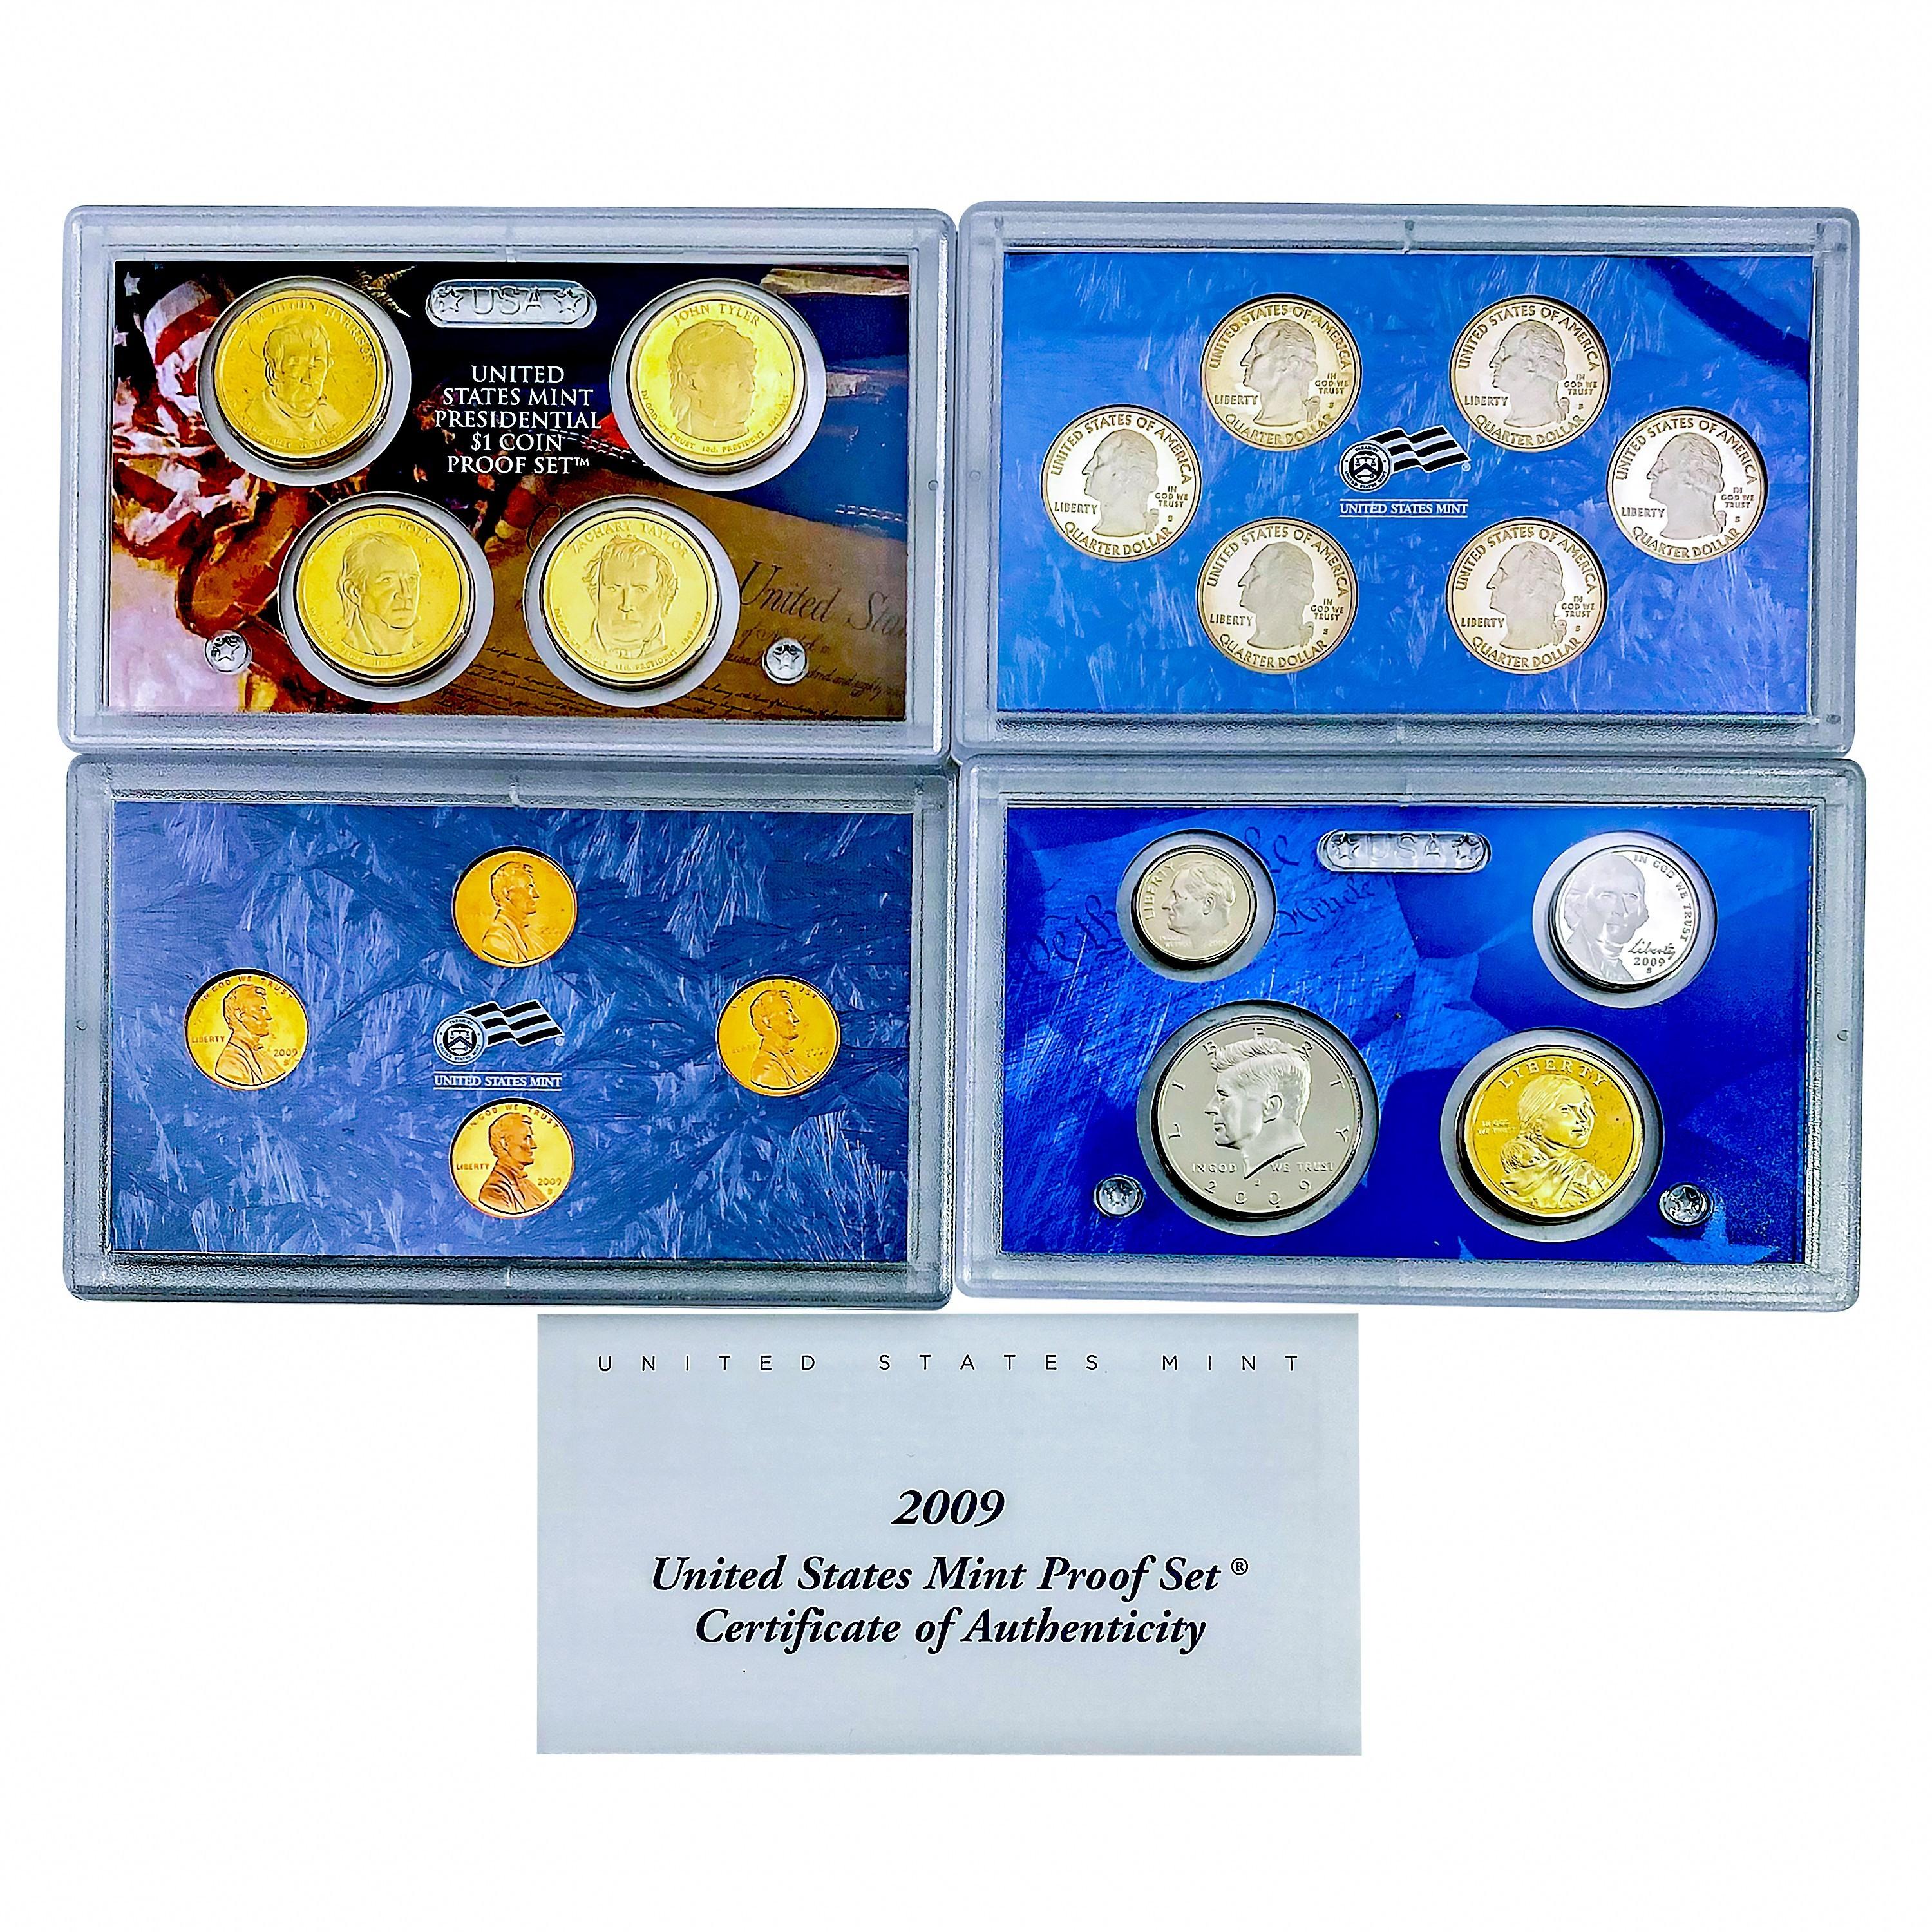 1976-2010 US Proof and UNC Mint Sets [53 Coins]